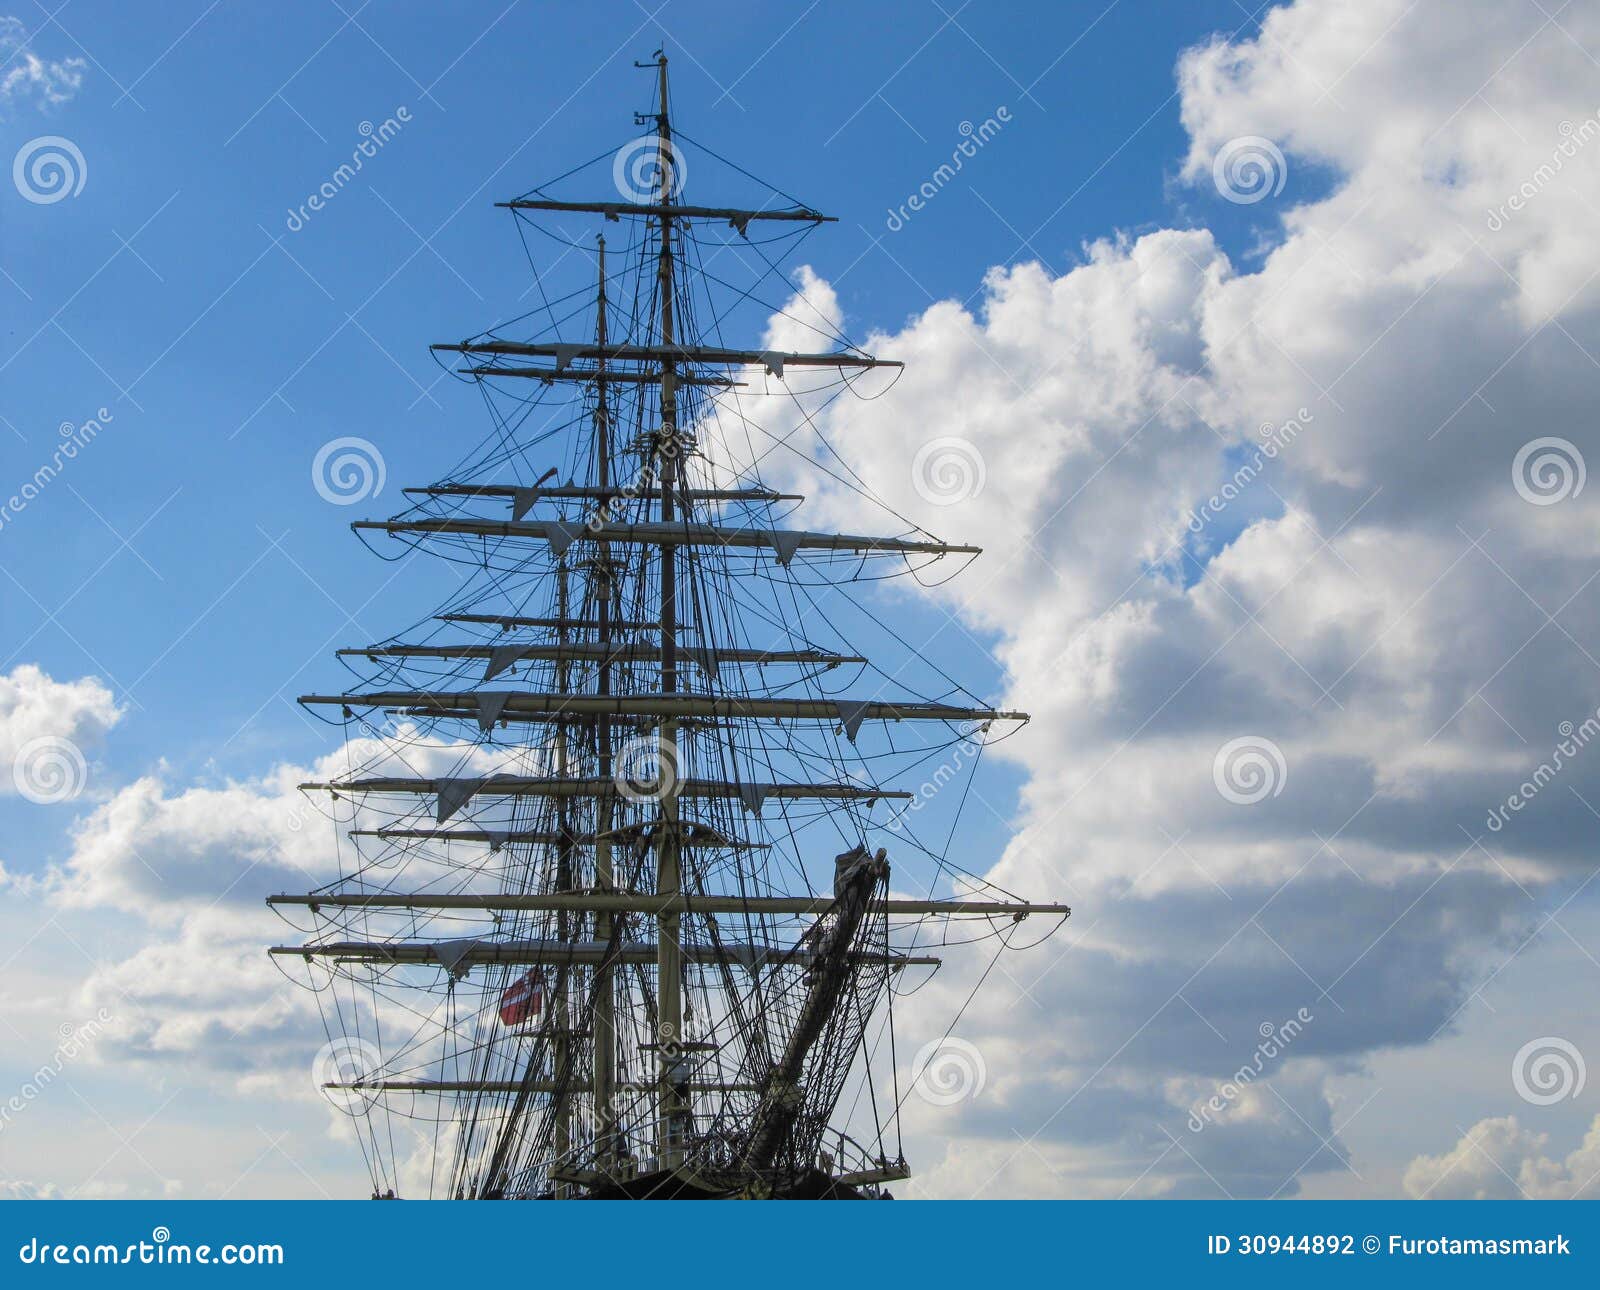 old style vintage three masts clipper ship